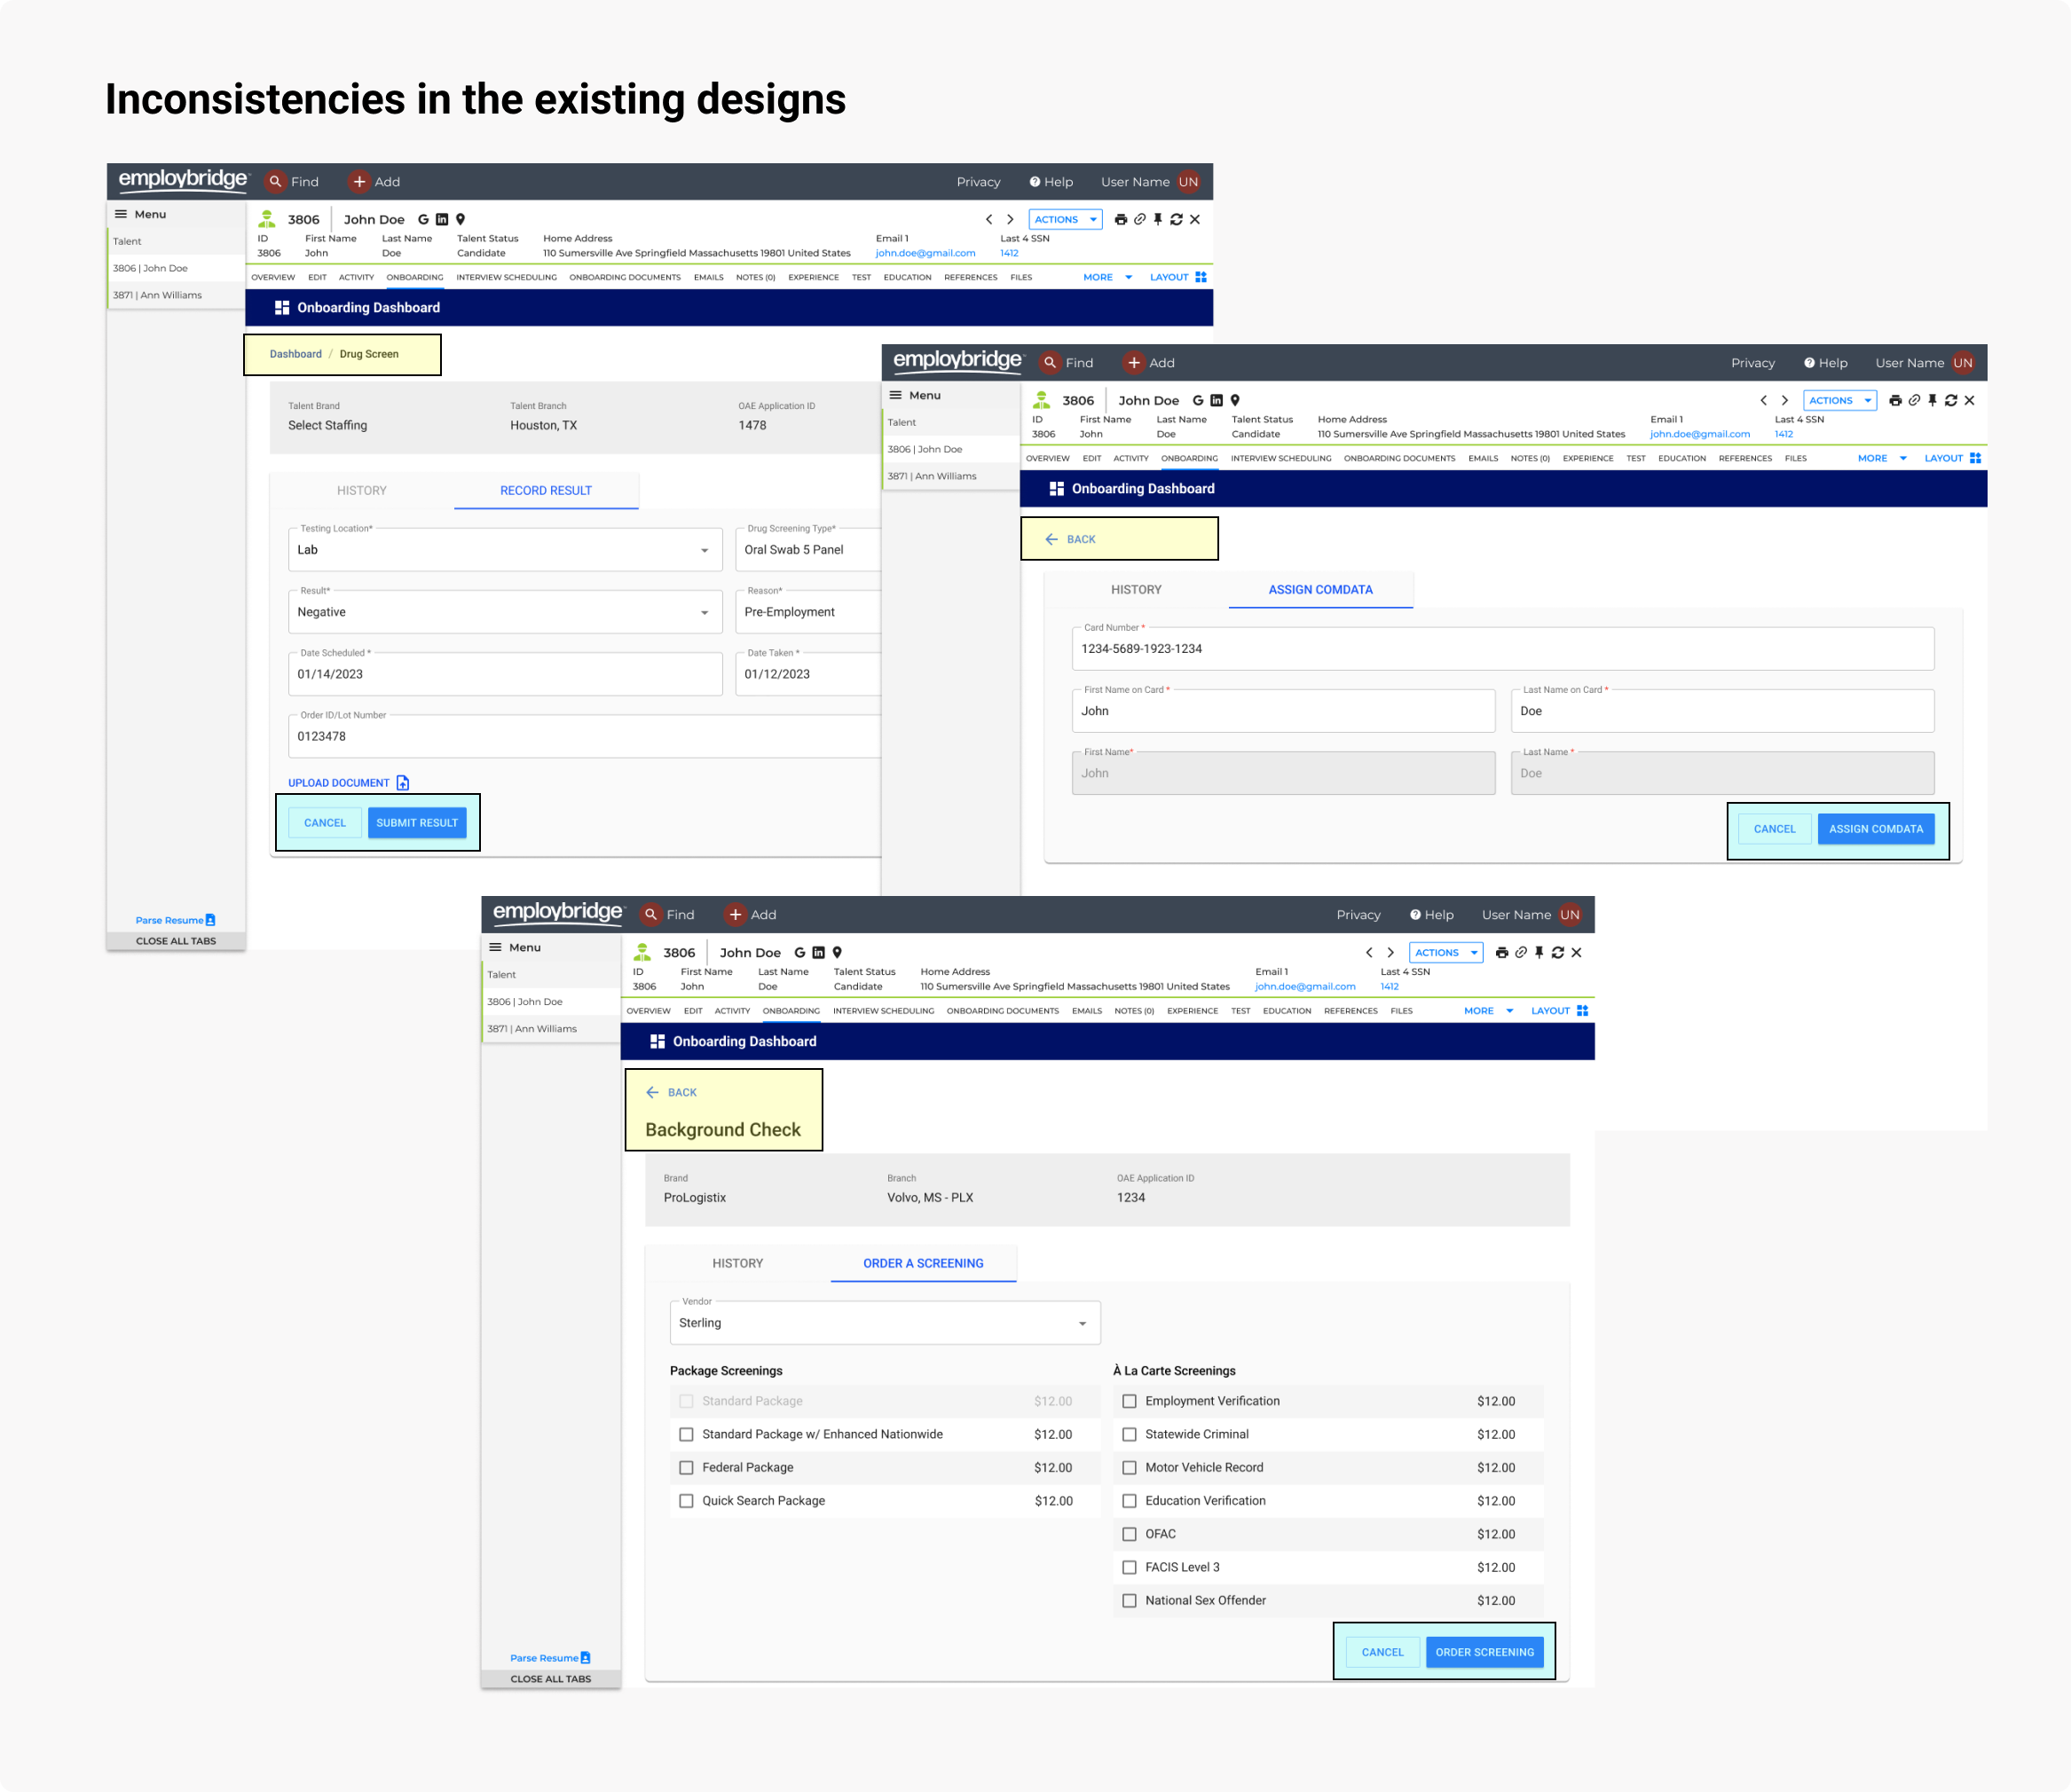 Title: Inconsistencies in the existing designs. Screenshots of three UI screens with notes on inconsistencies including button placement and page header..